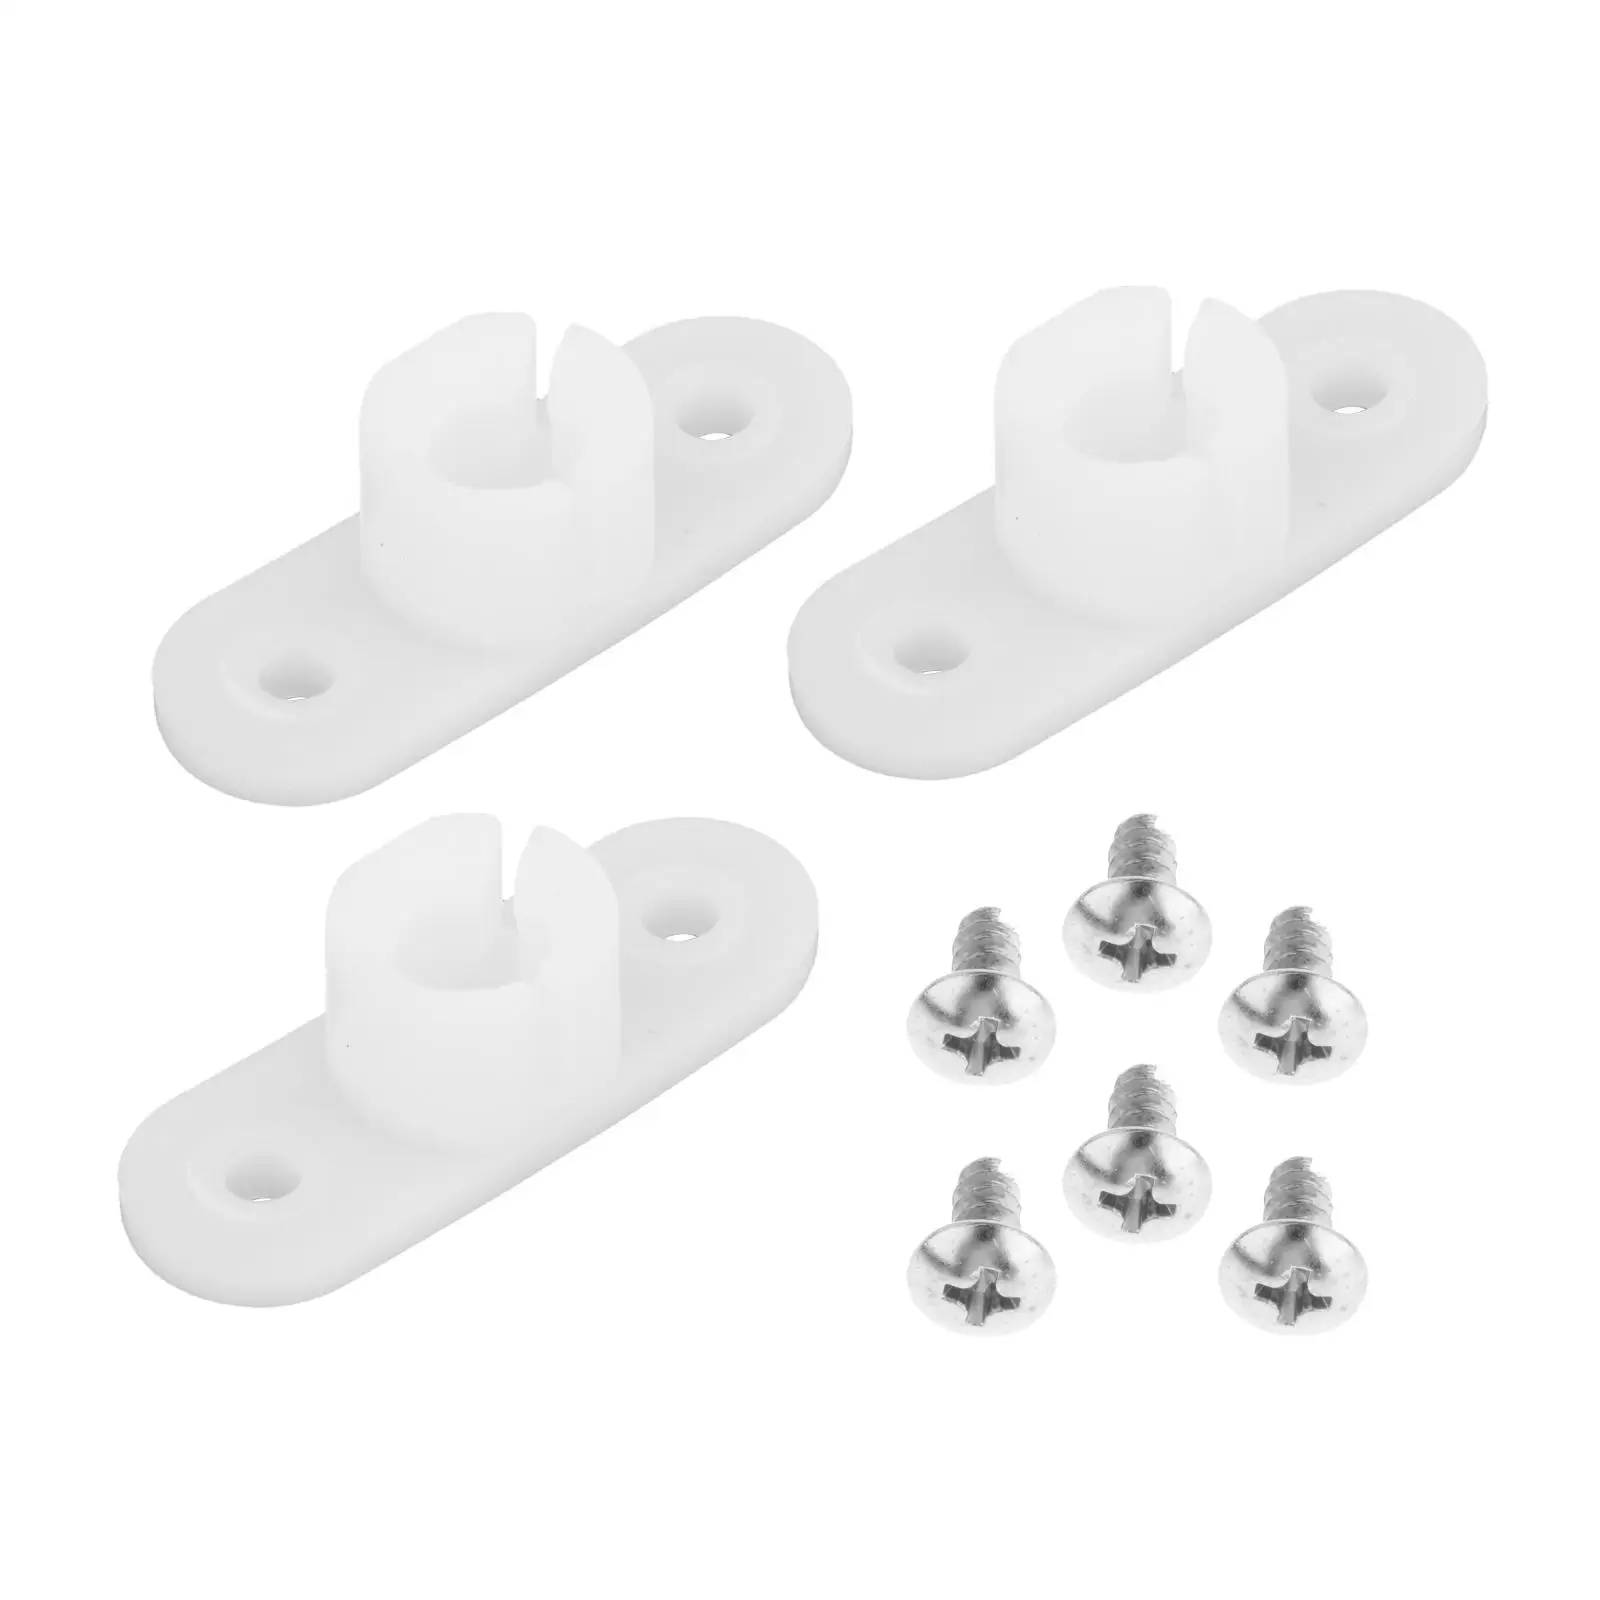 Headlamp Clip Kit STC3368 for Land Rover Discovery 1, 2 - Durable Plastic, Set - $23.42